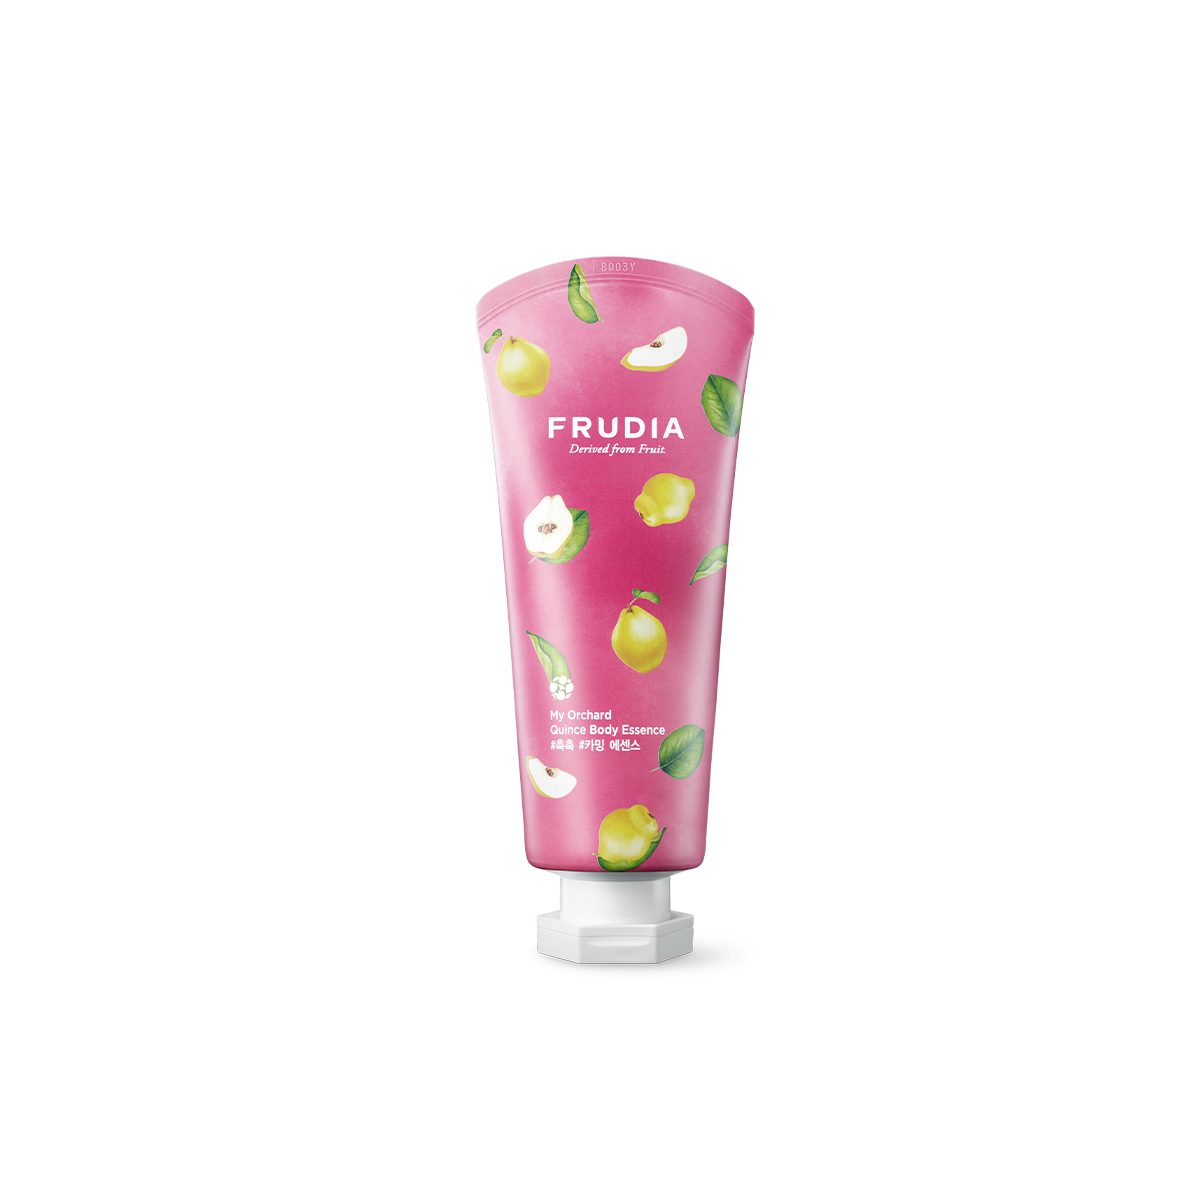 50Frudia My Orchard Quince Body Essence 200ml